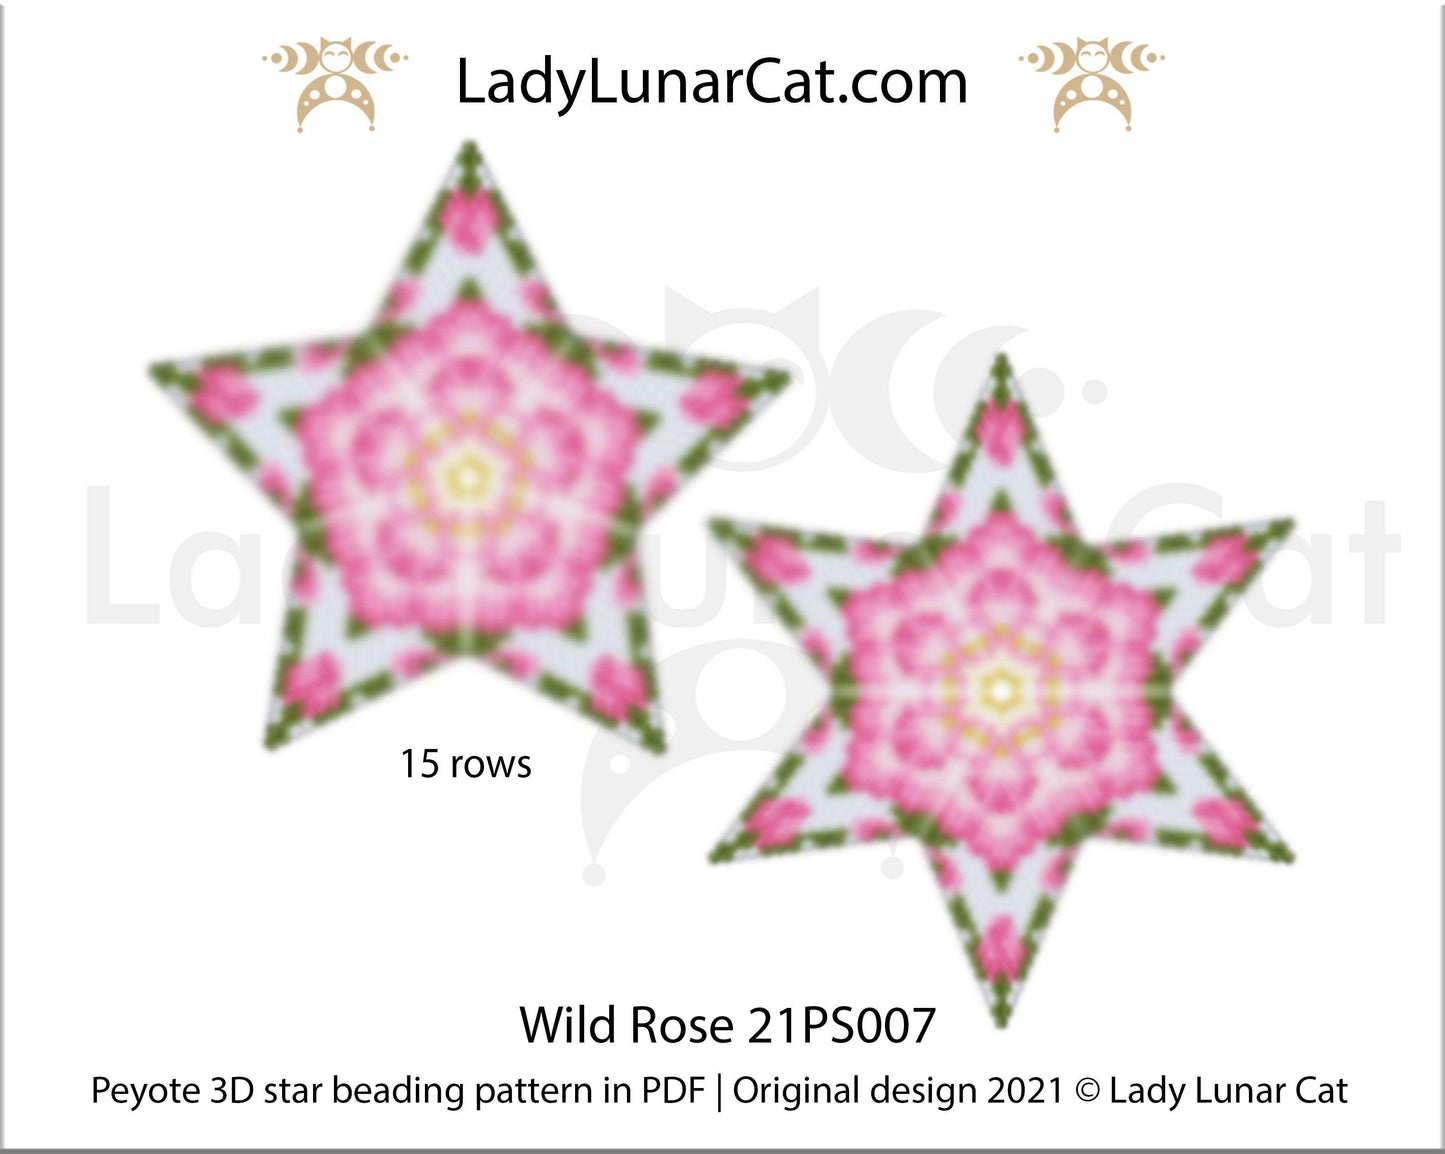 Copy of Beaded star pattern - Summer night 21PS023 | Seed beads tutorial for 3D peyote star LadyLunarCat